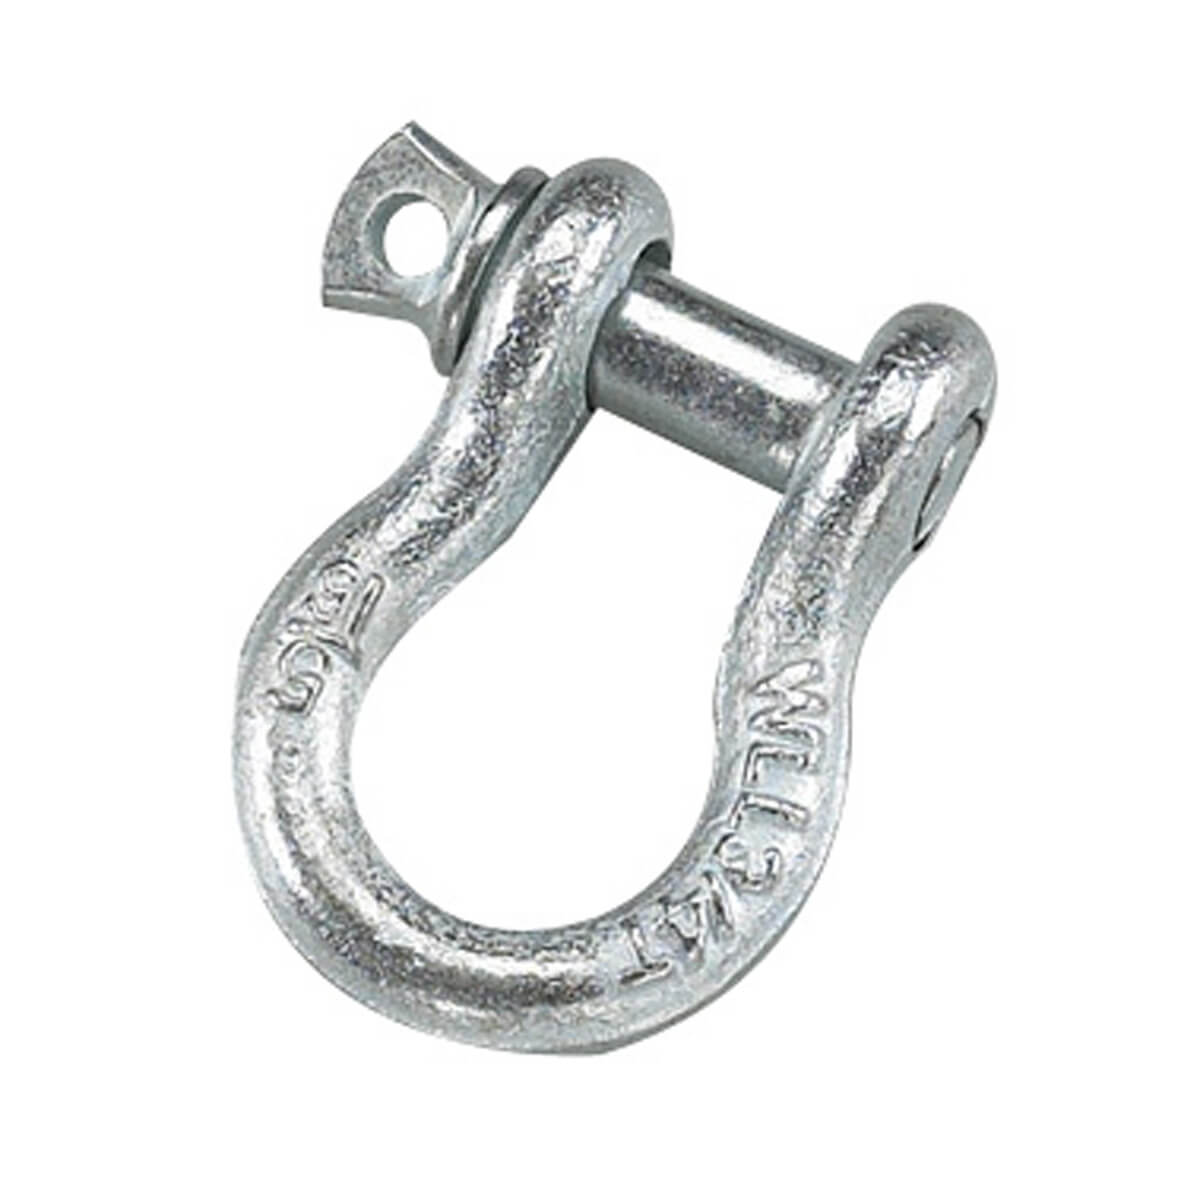 Screw Pin Anchor Shackle - 5/16-in